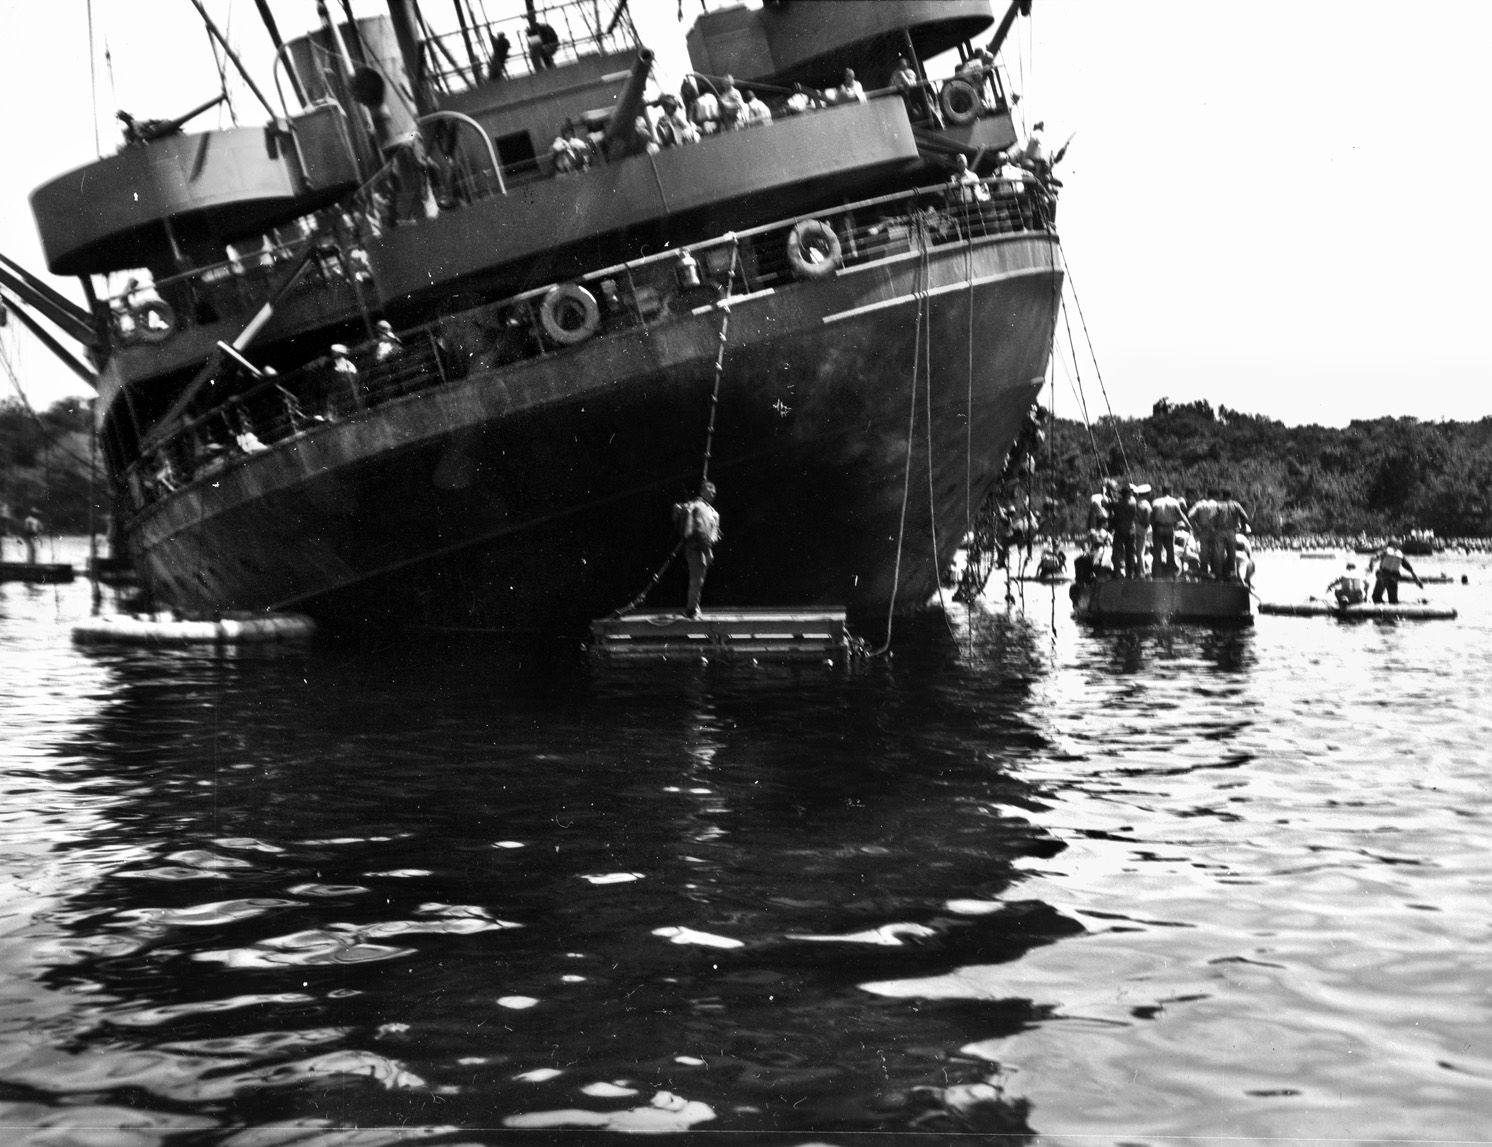 After a pair of sea mines detonated under the hull of the troop transport SS President Coolidge, the ship remained afloat for 78 minutes before sliding beneath the surface. 